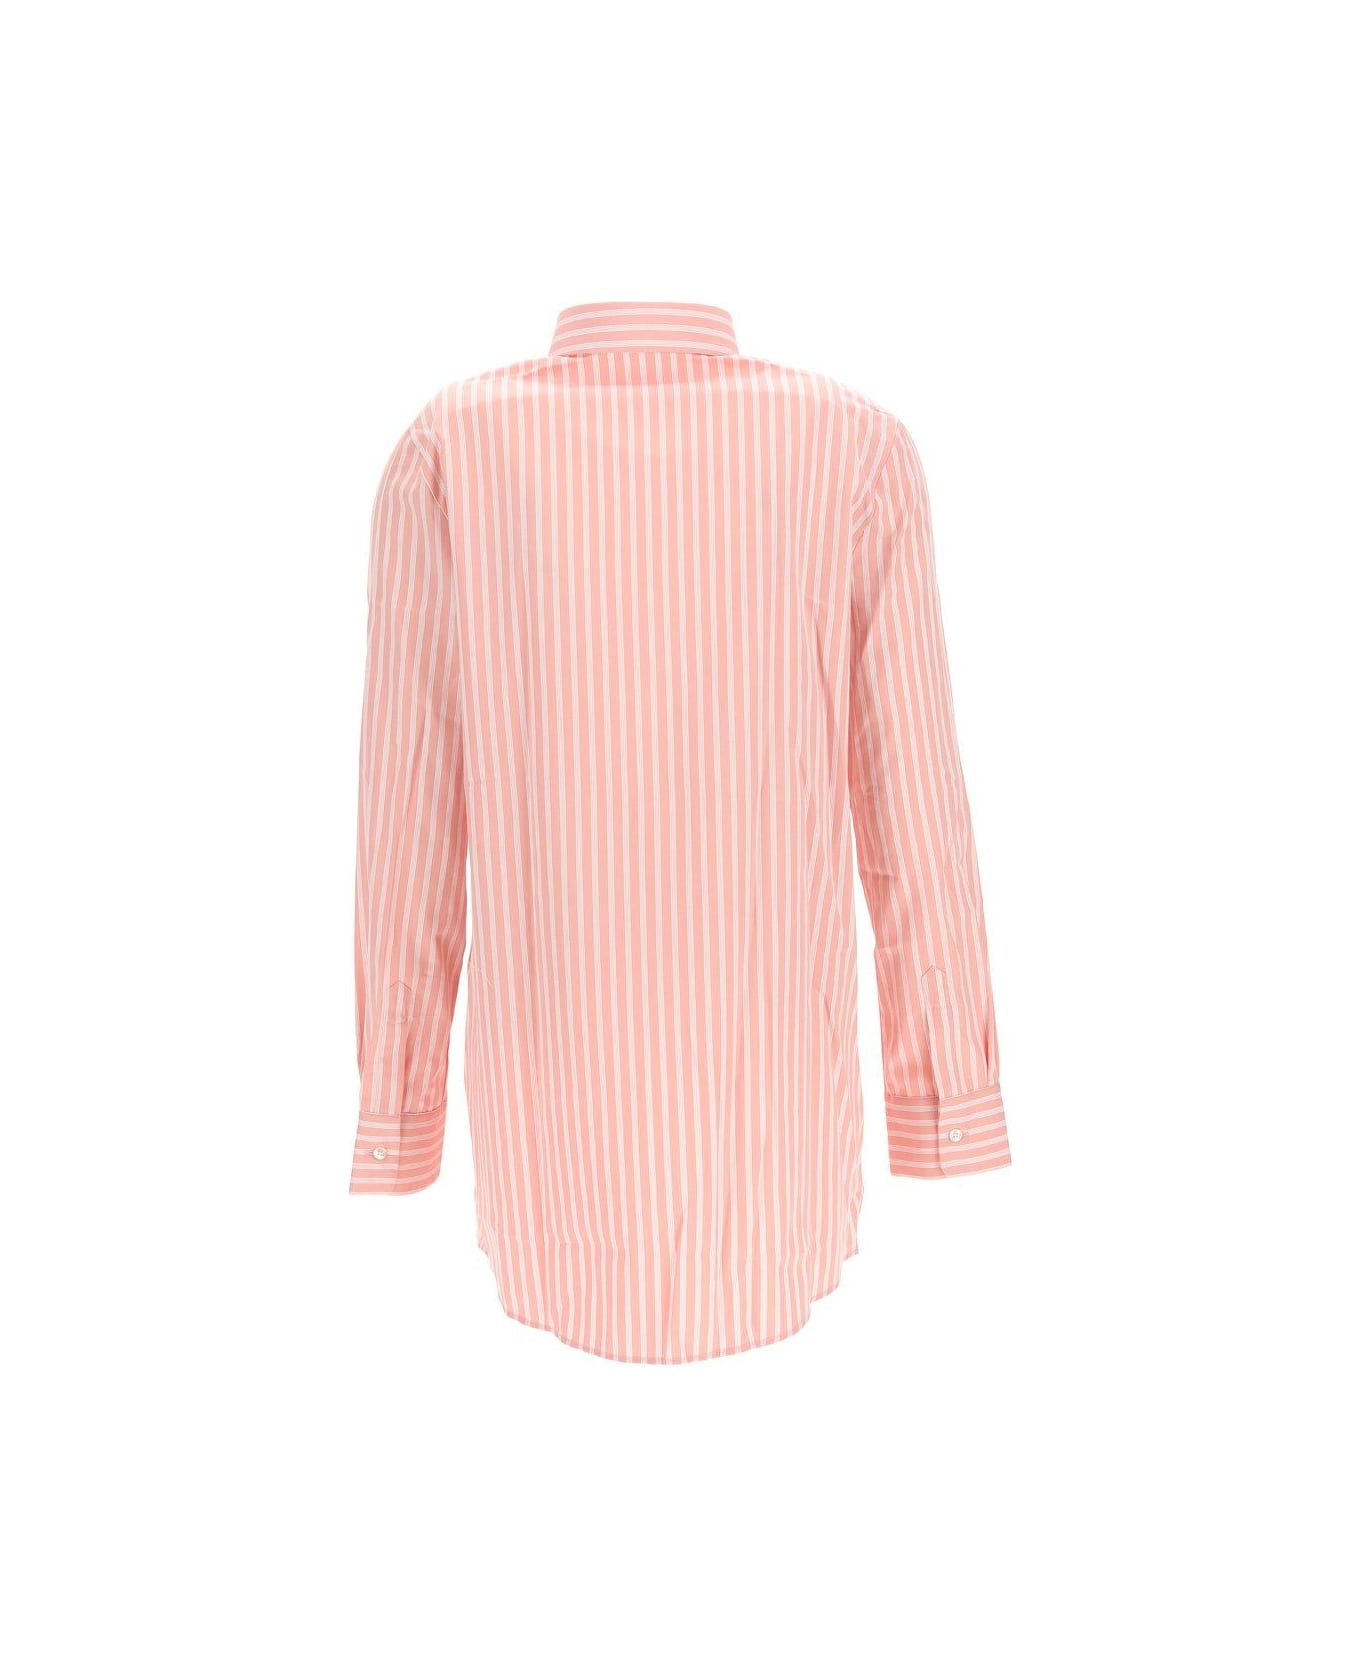 Etro Logo-embroidered Striped Buttoned Shirt Etro - PINK